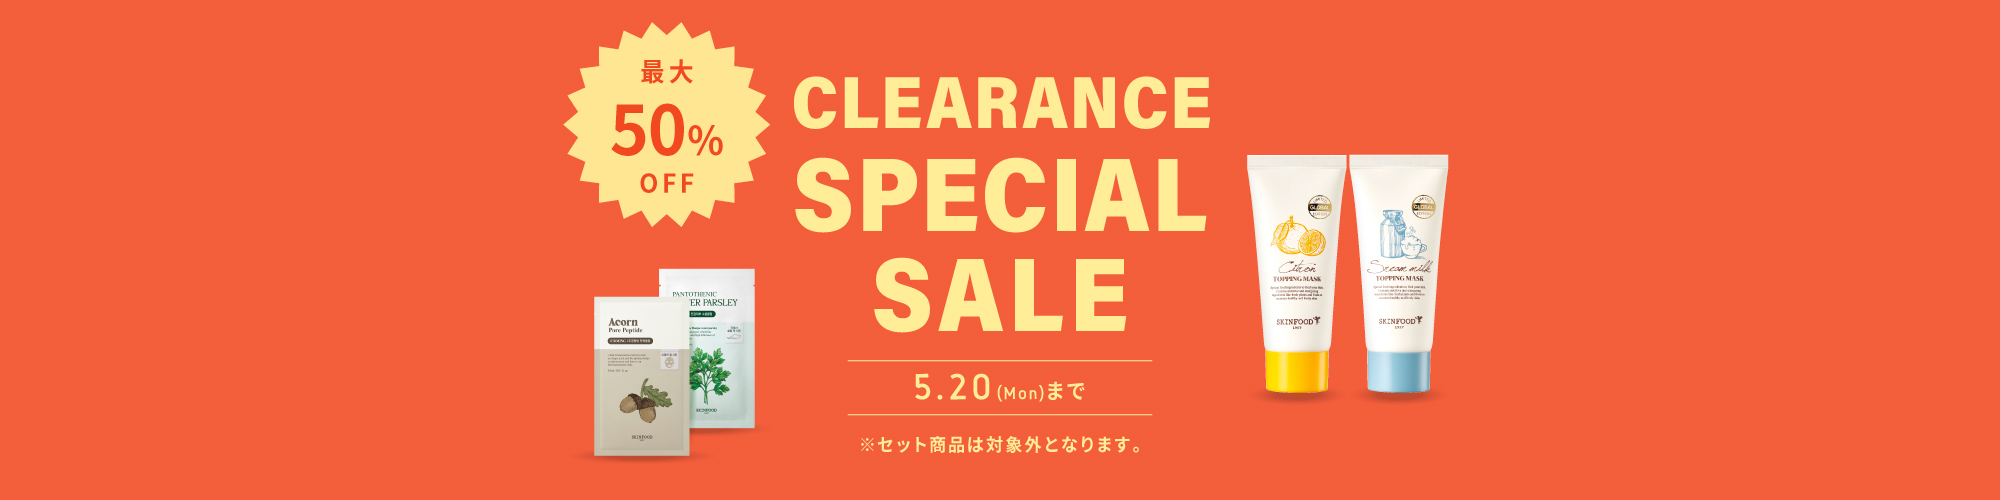 CLEARANCE SPECIAL SALE